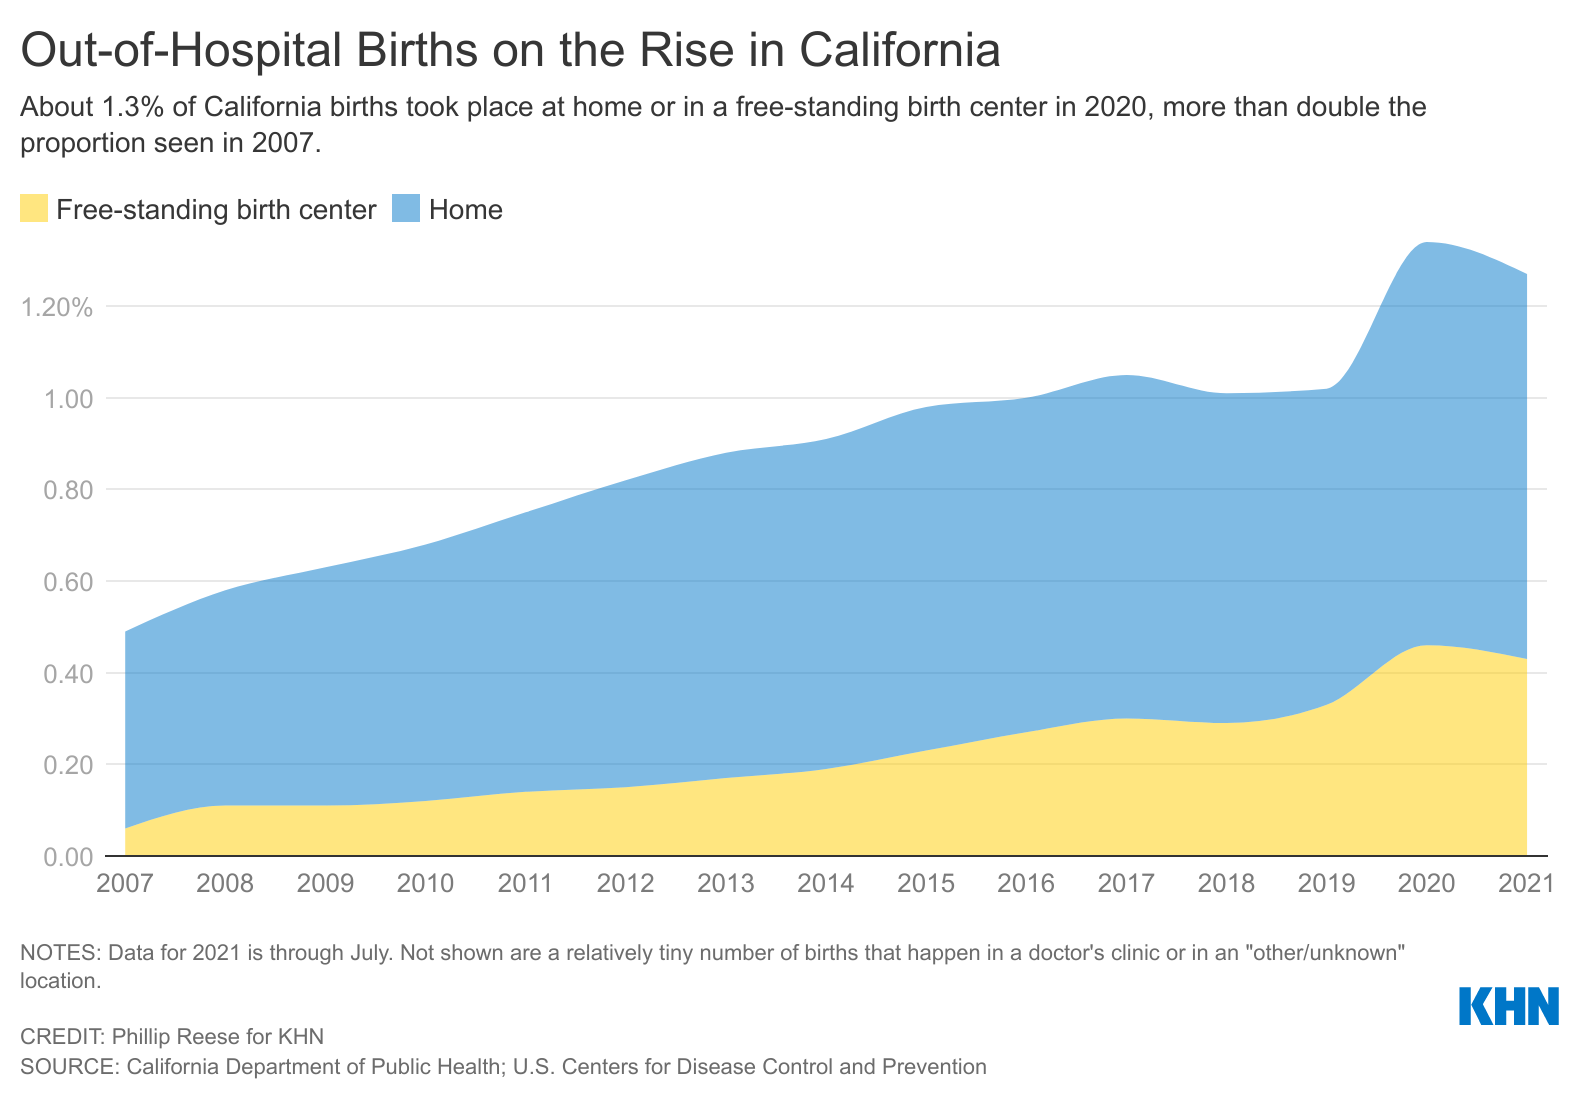 Home Births Gain Popularity in ‘Baby Bust’ Decade